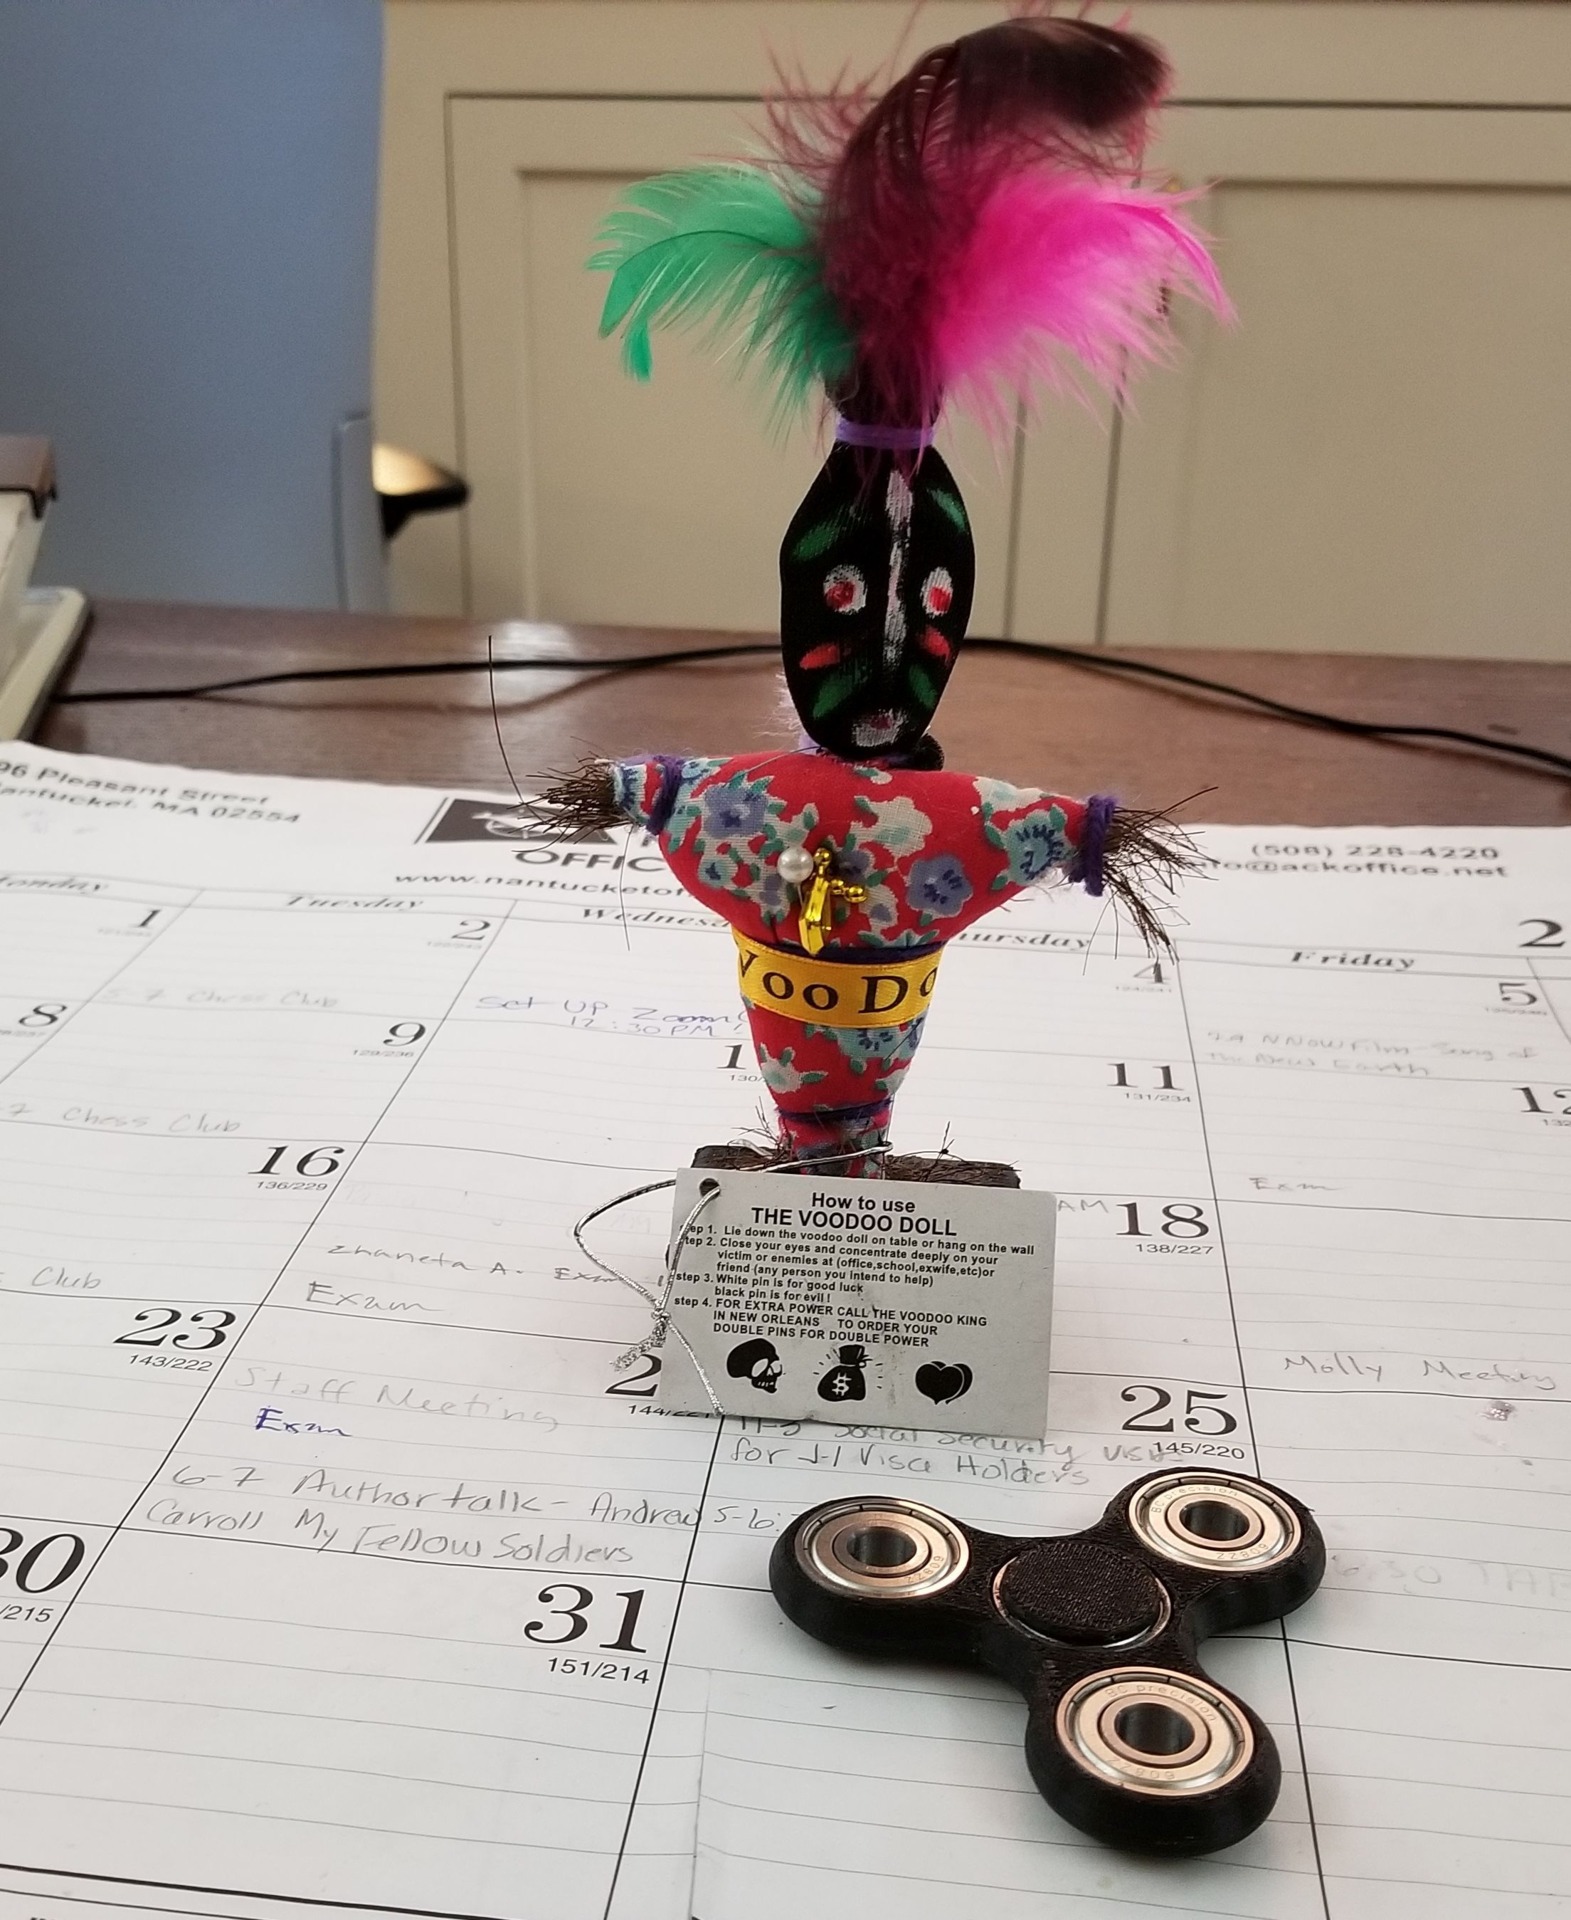 Yeah, I have a voodoo doll on my desk too...doesn't everyone?